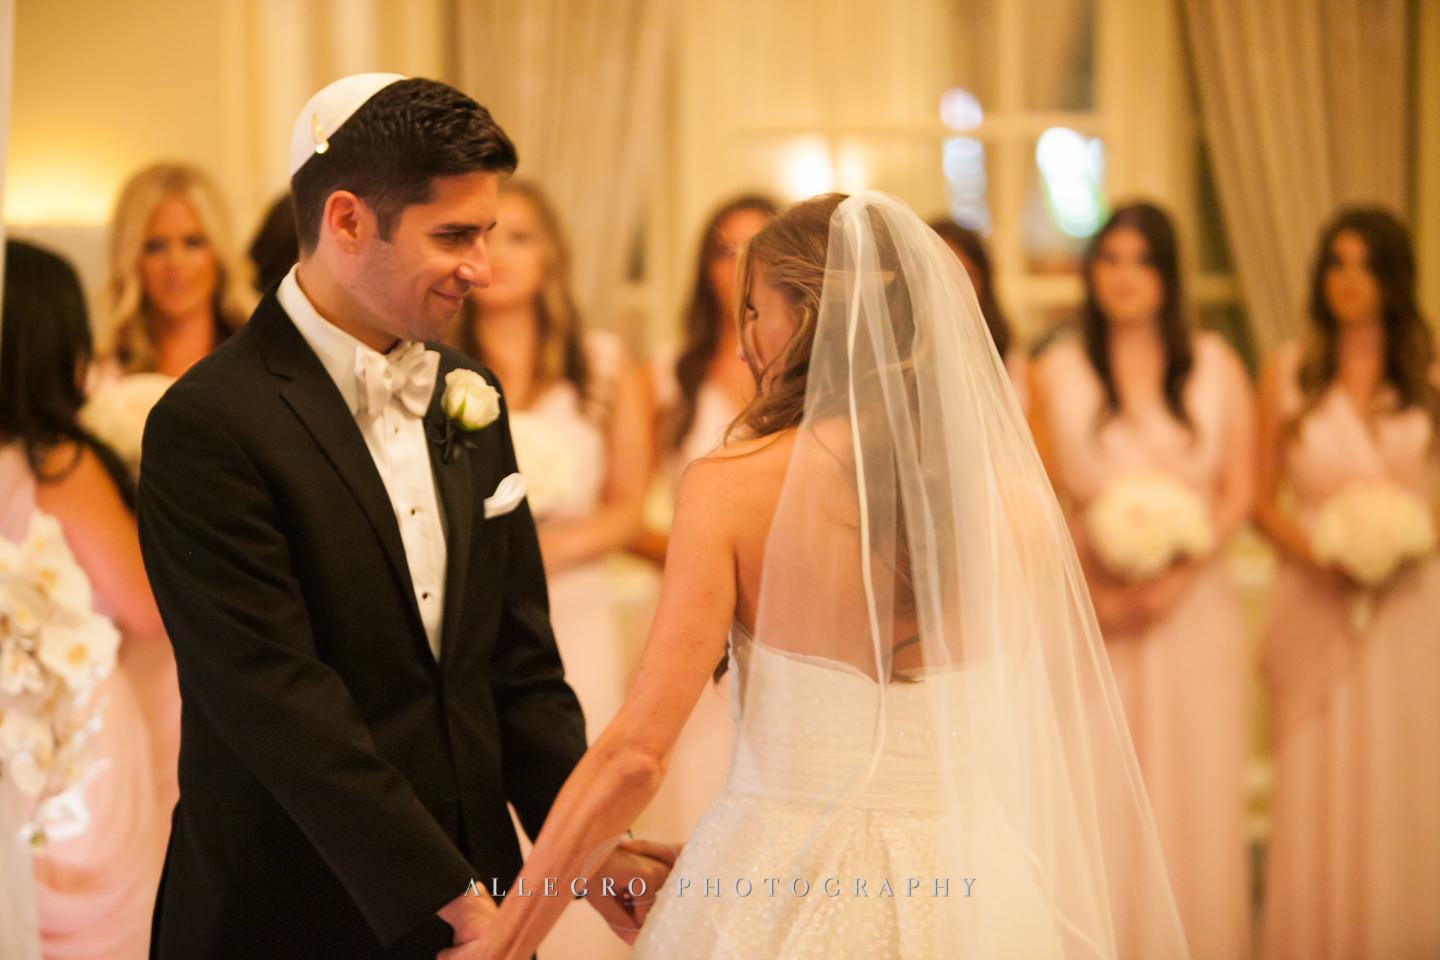 circling each other- boston jewish wedding - photo by allegro photography